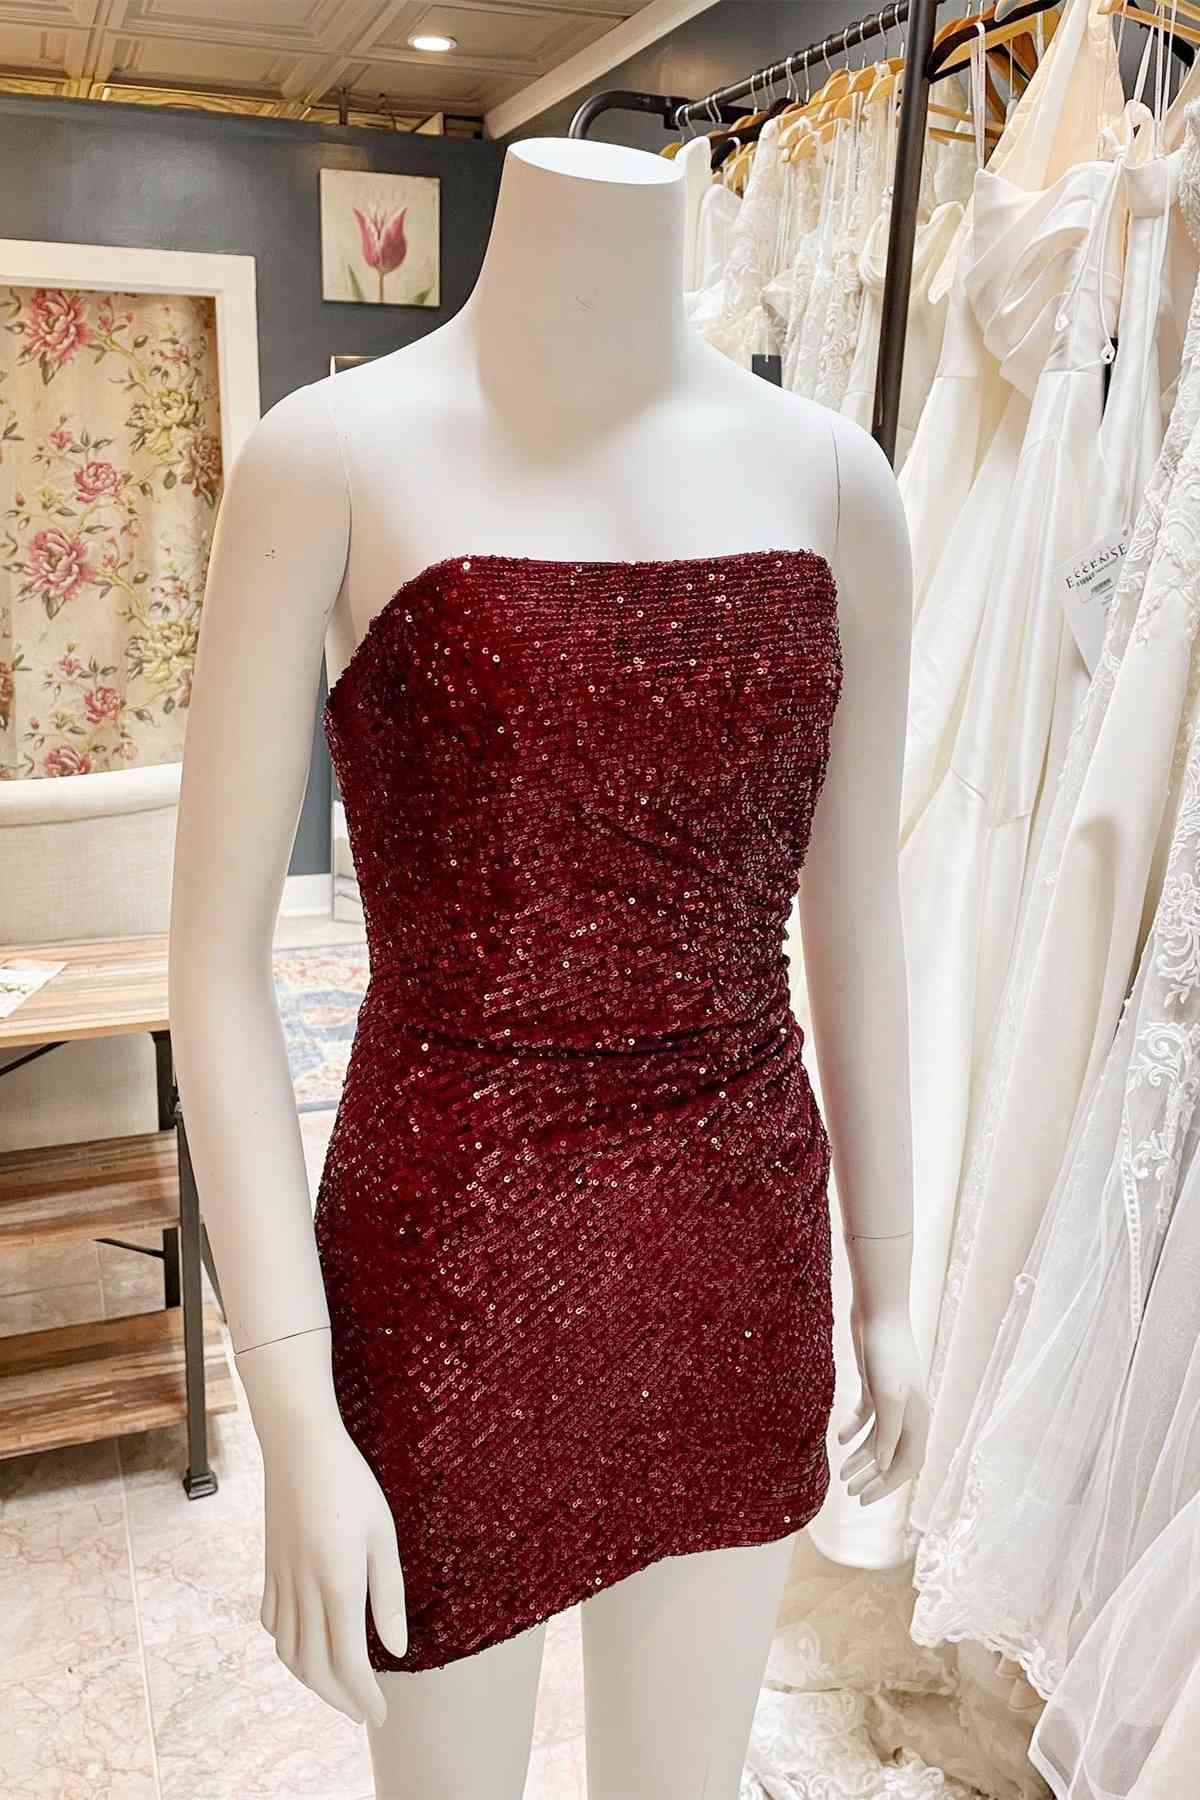 Party Dress Big Size, Glitter Orange Strapless Sequined Mini Homecoming Dress